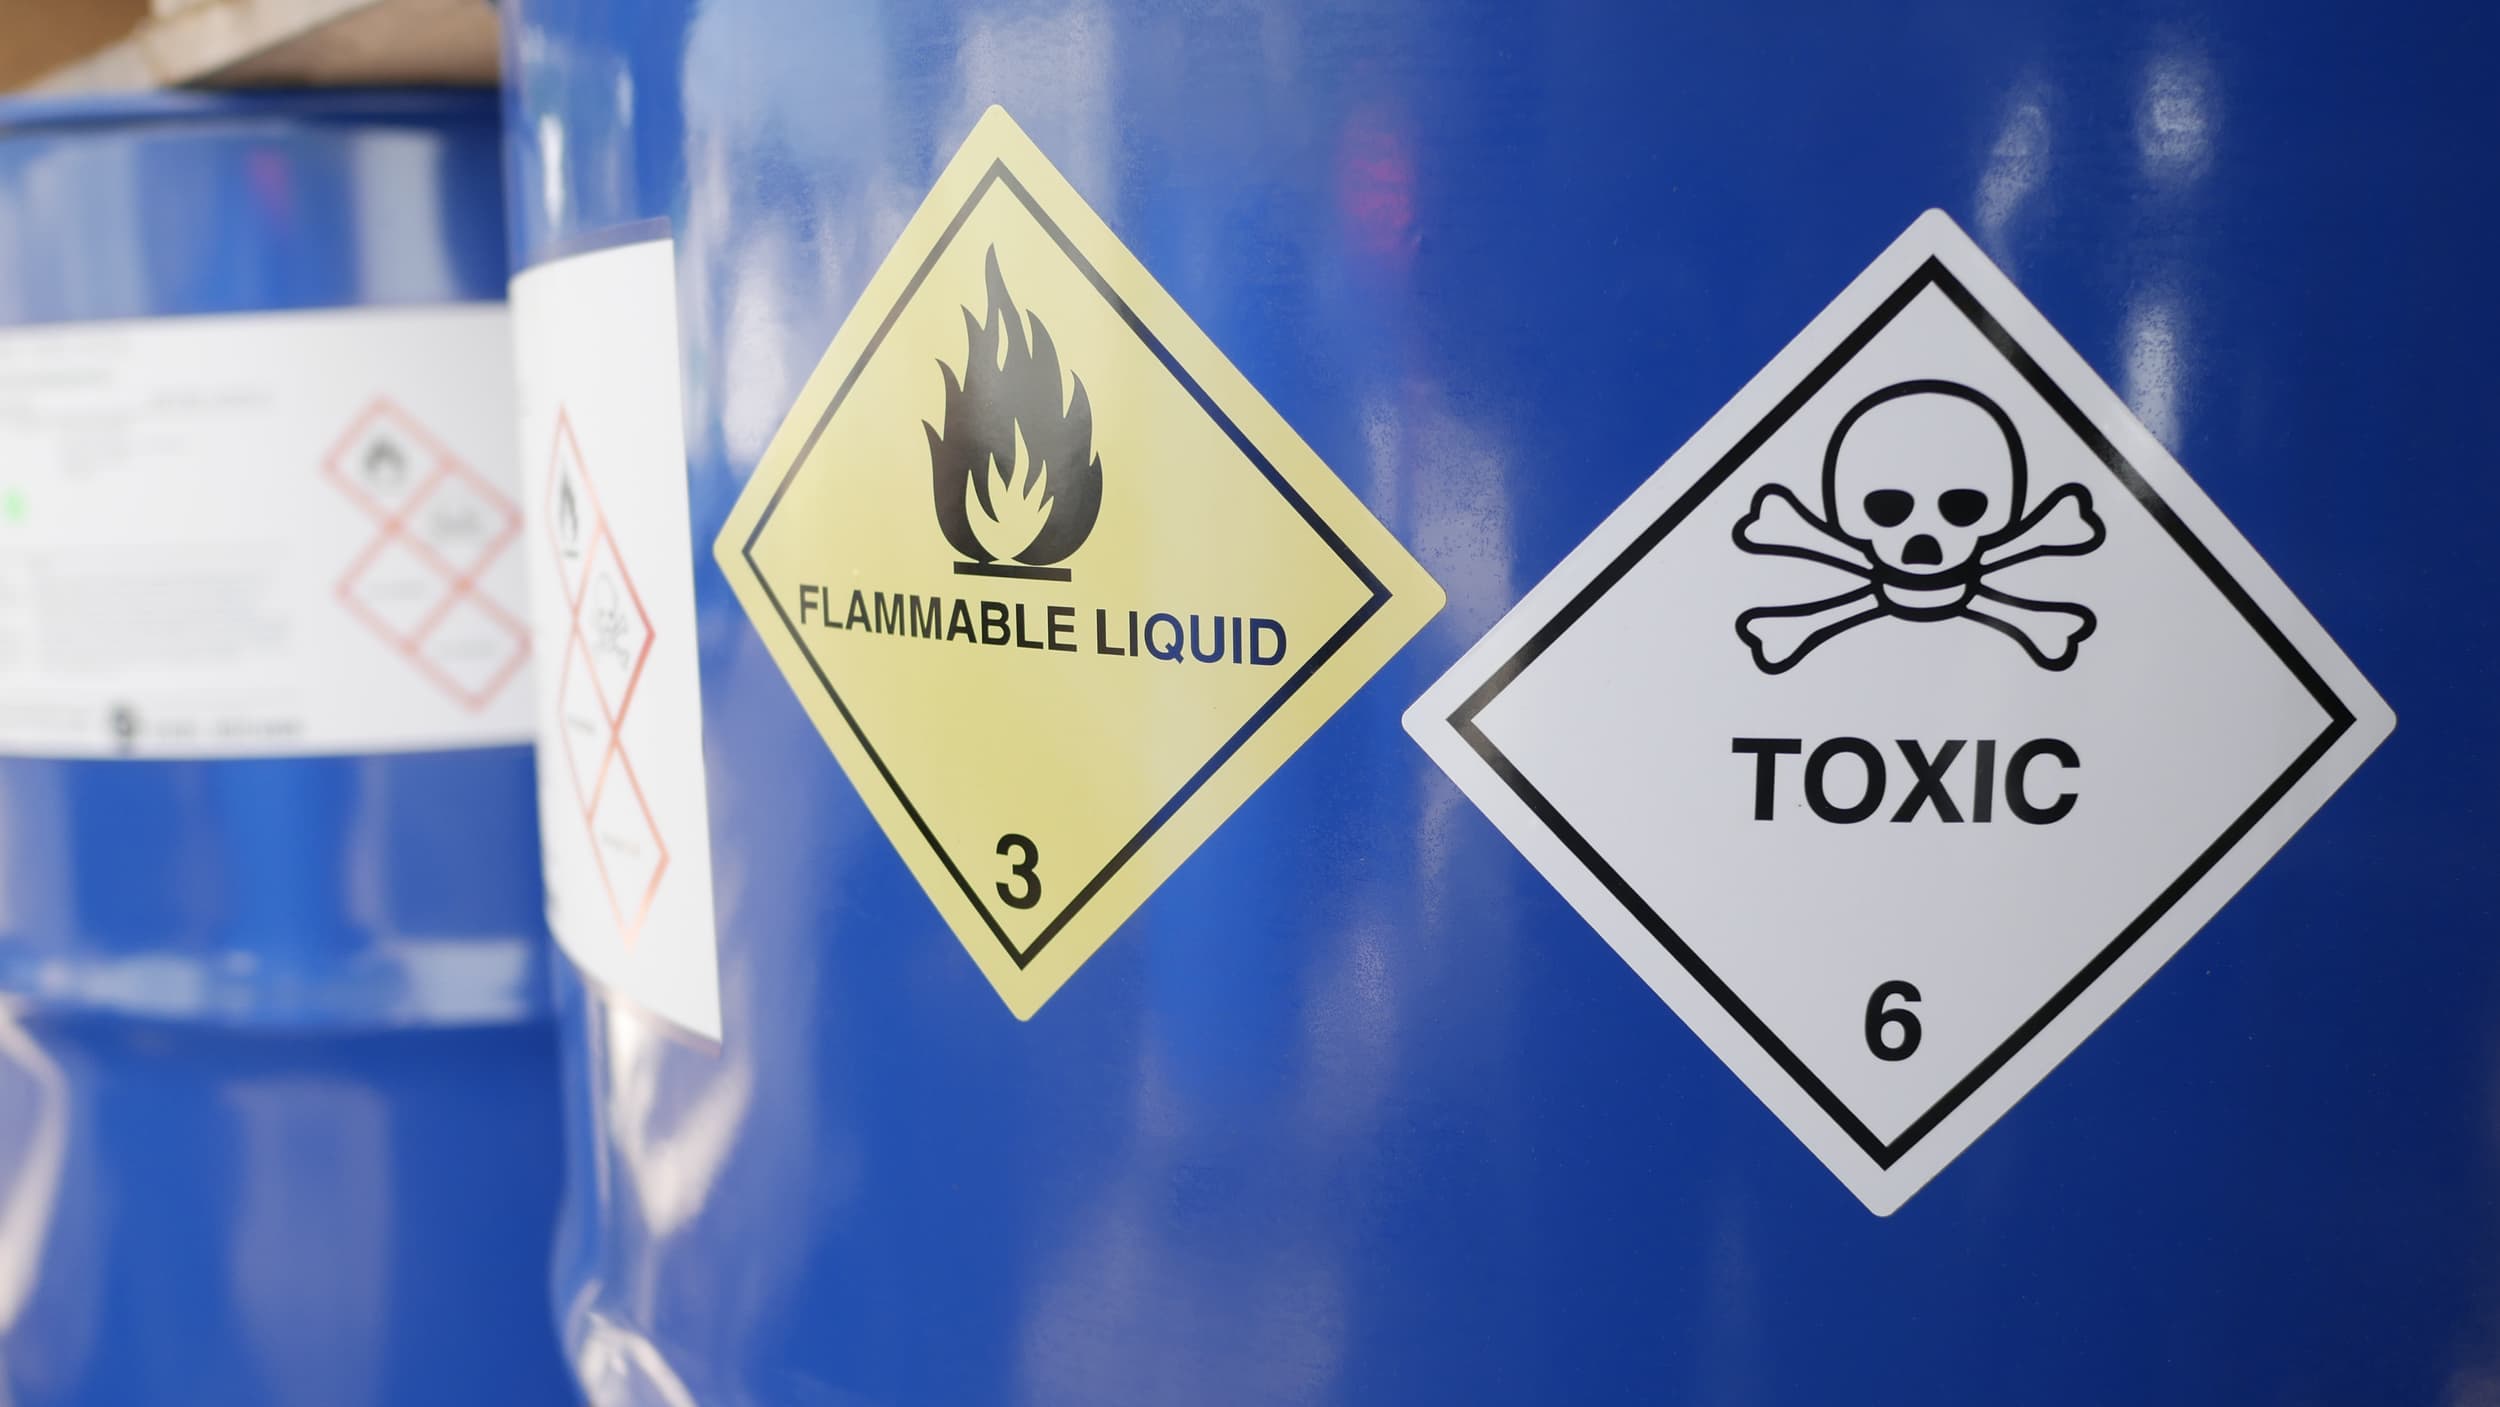 Compliance Training Online Industrial Chemical Hazards & Toxic Substances course